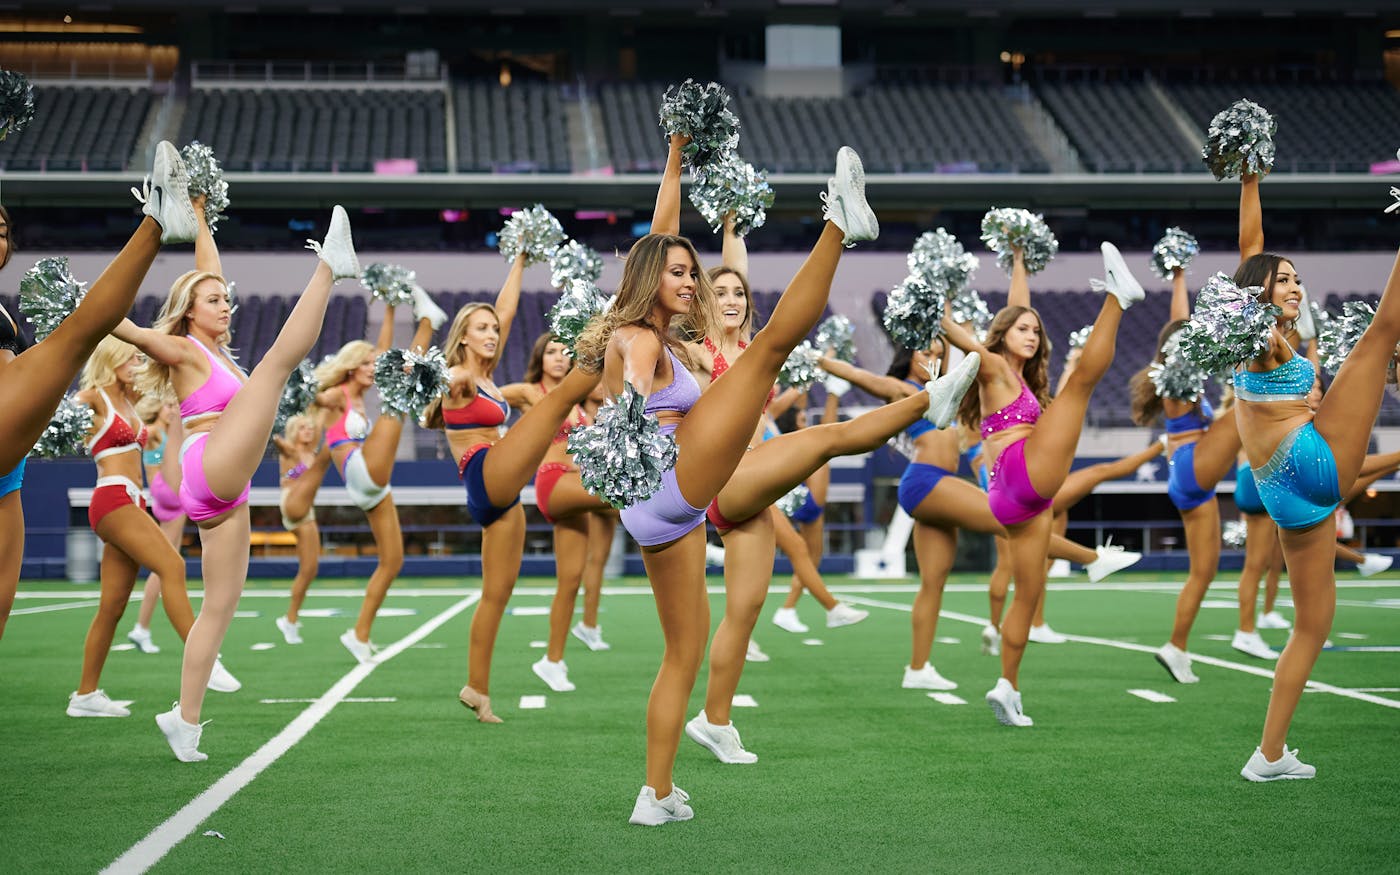 A day in the life of an NFL cheerleader